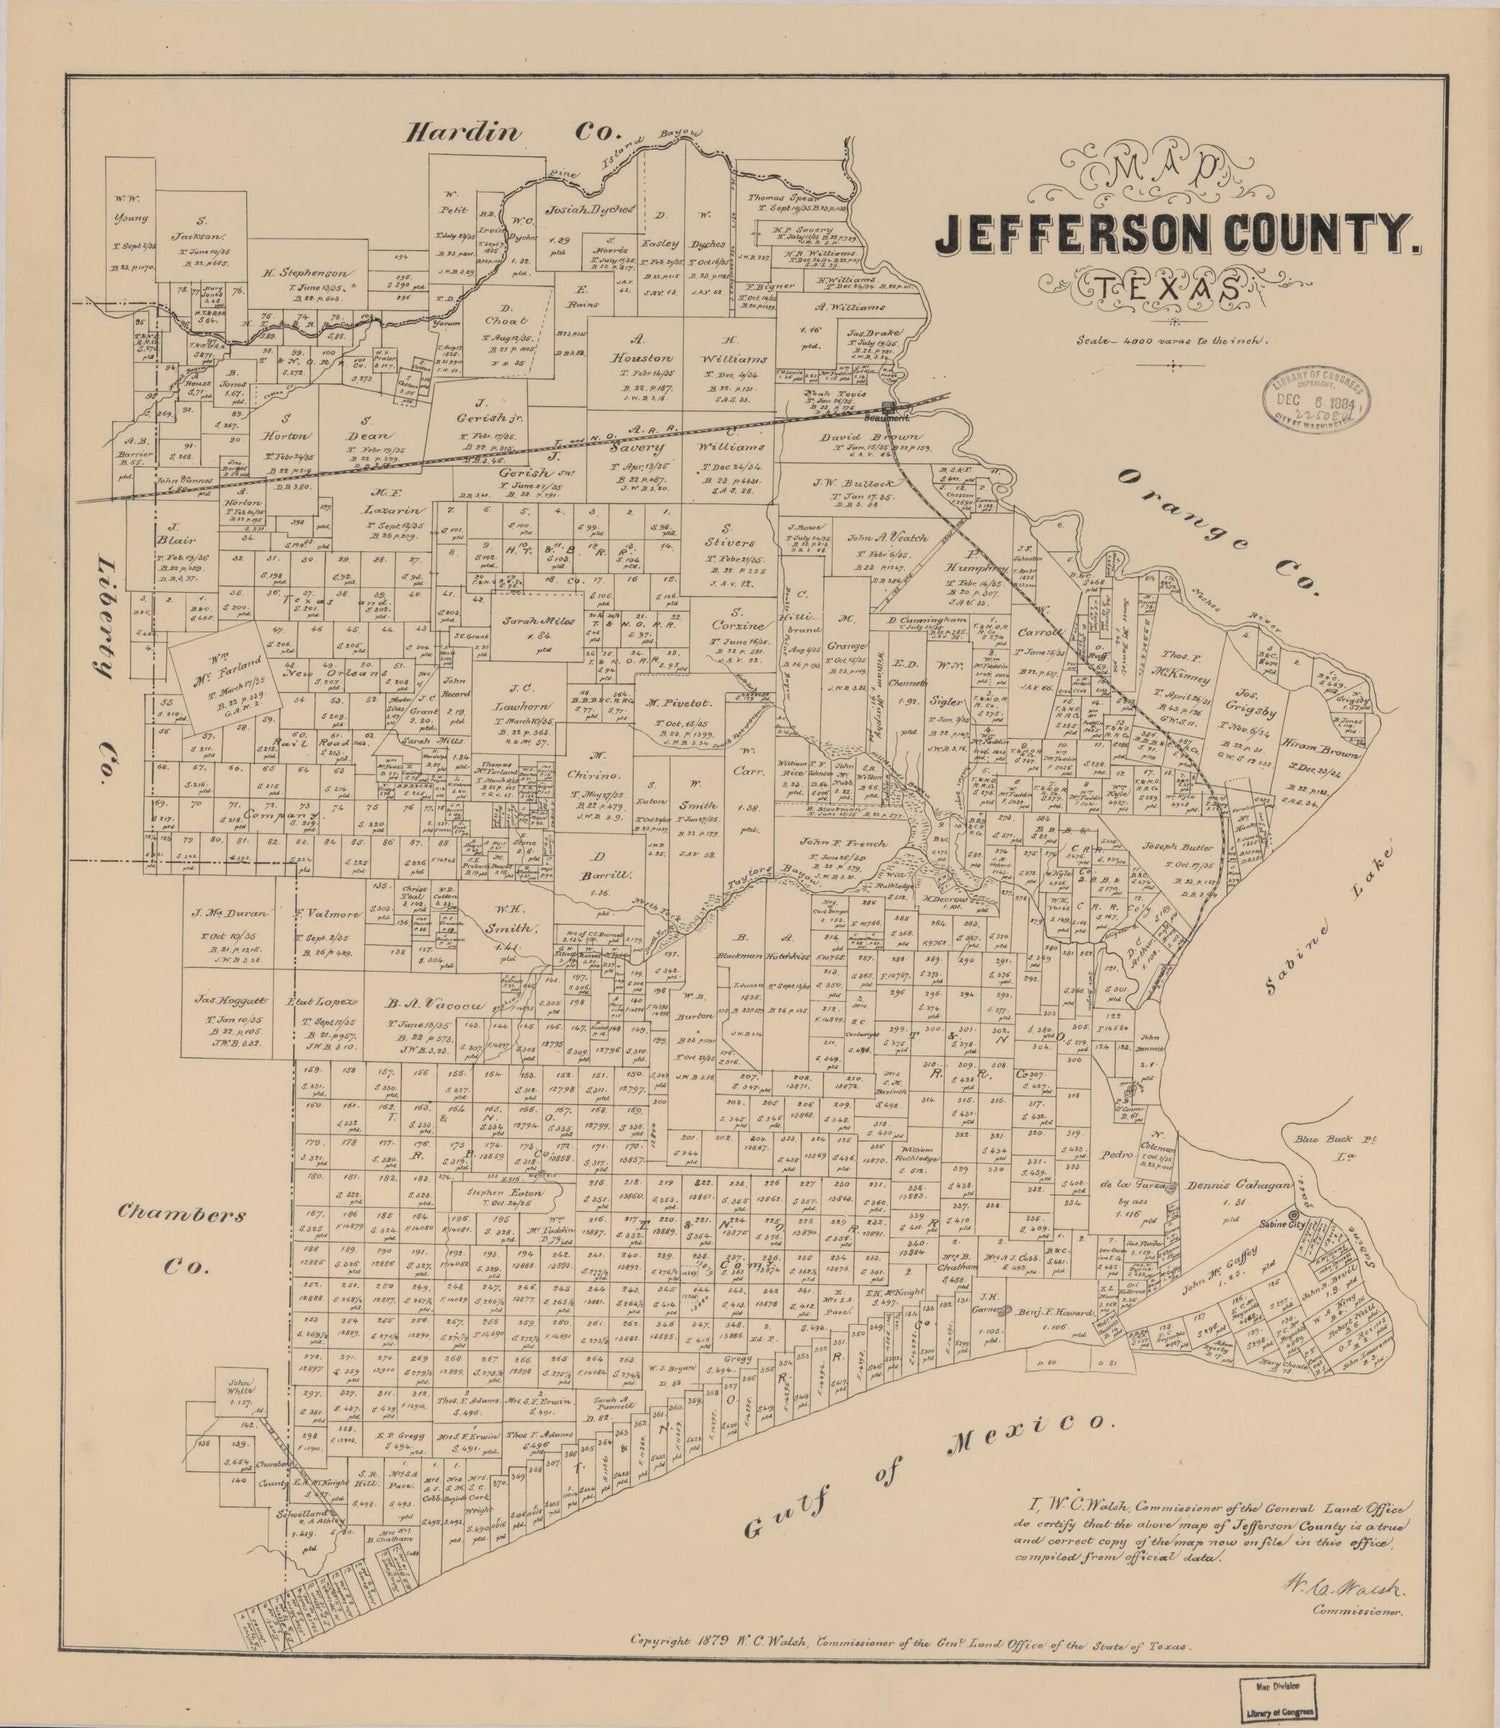 This old map of Map Jefferson County, Texas from 1879 was created by  Texas. General Land Office, W. C. (William C.) Walsh in 1879